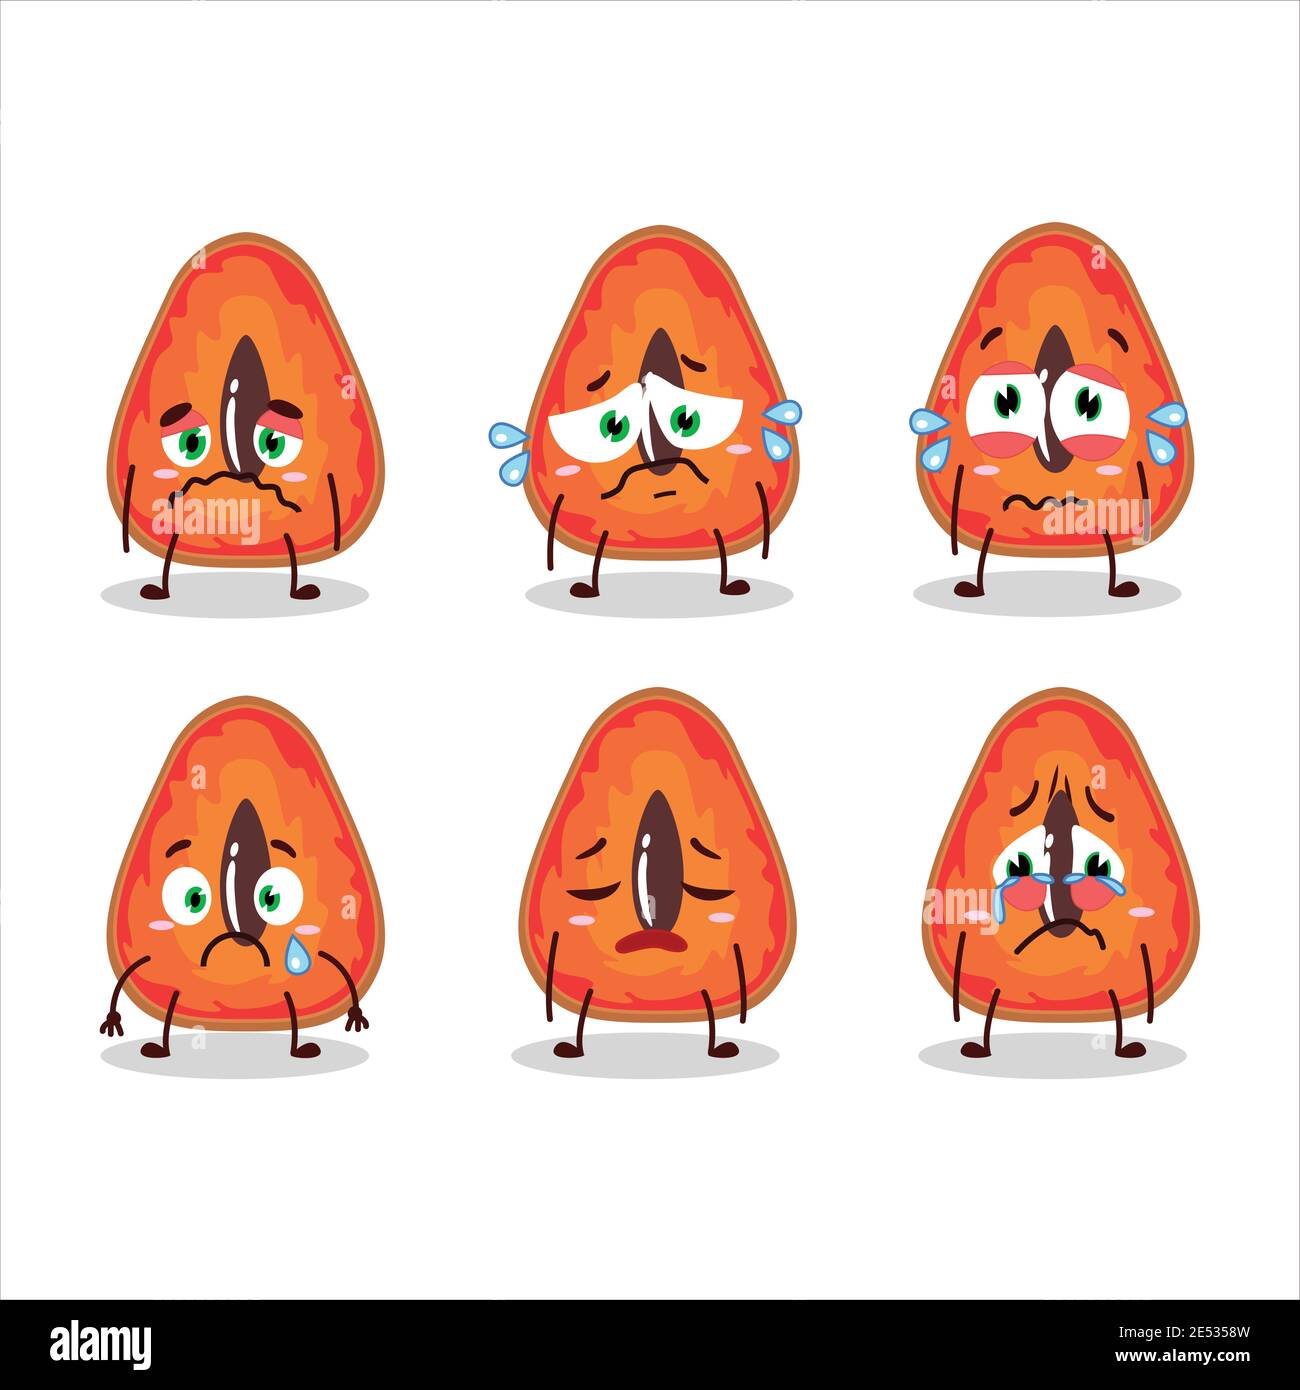 Slice of mamey cartoon character with sad expression. Vector illustration Stock Vector